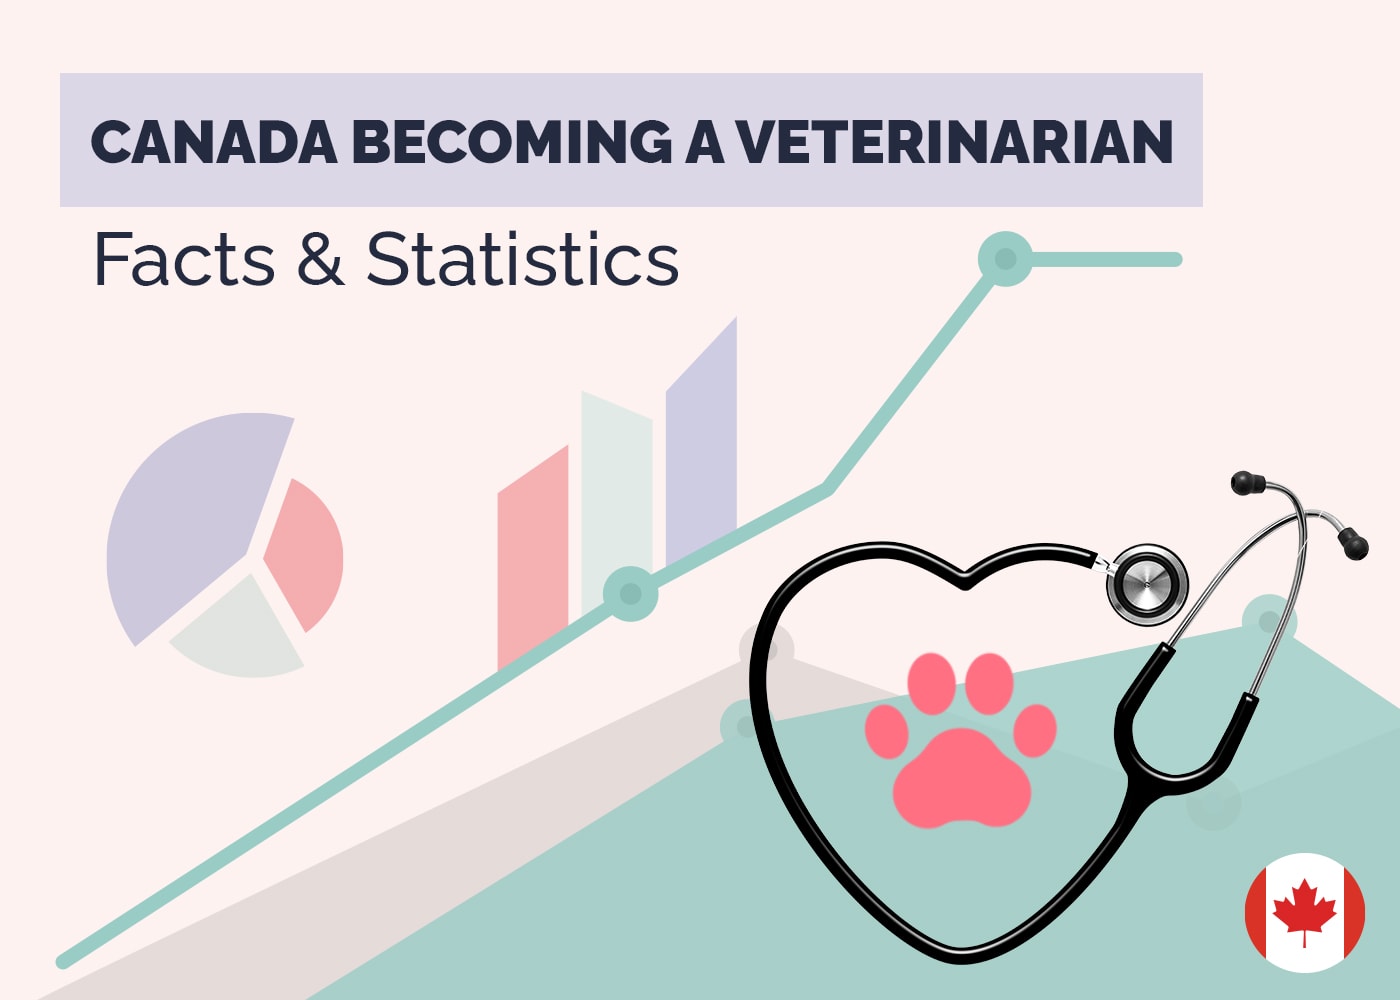 Canada becoming a country a veterinarian Facts & Statistics